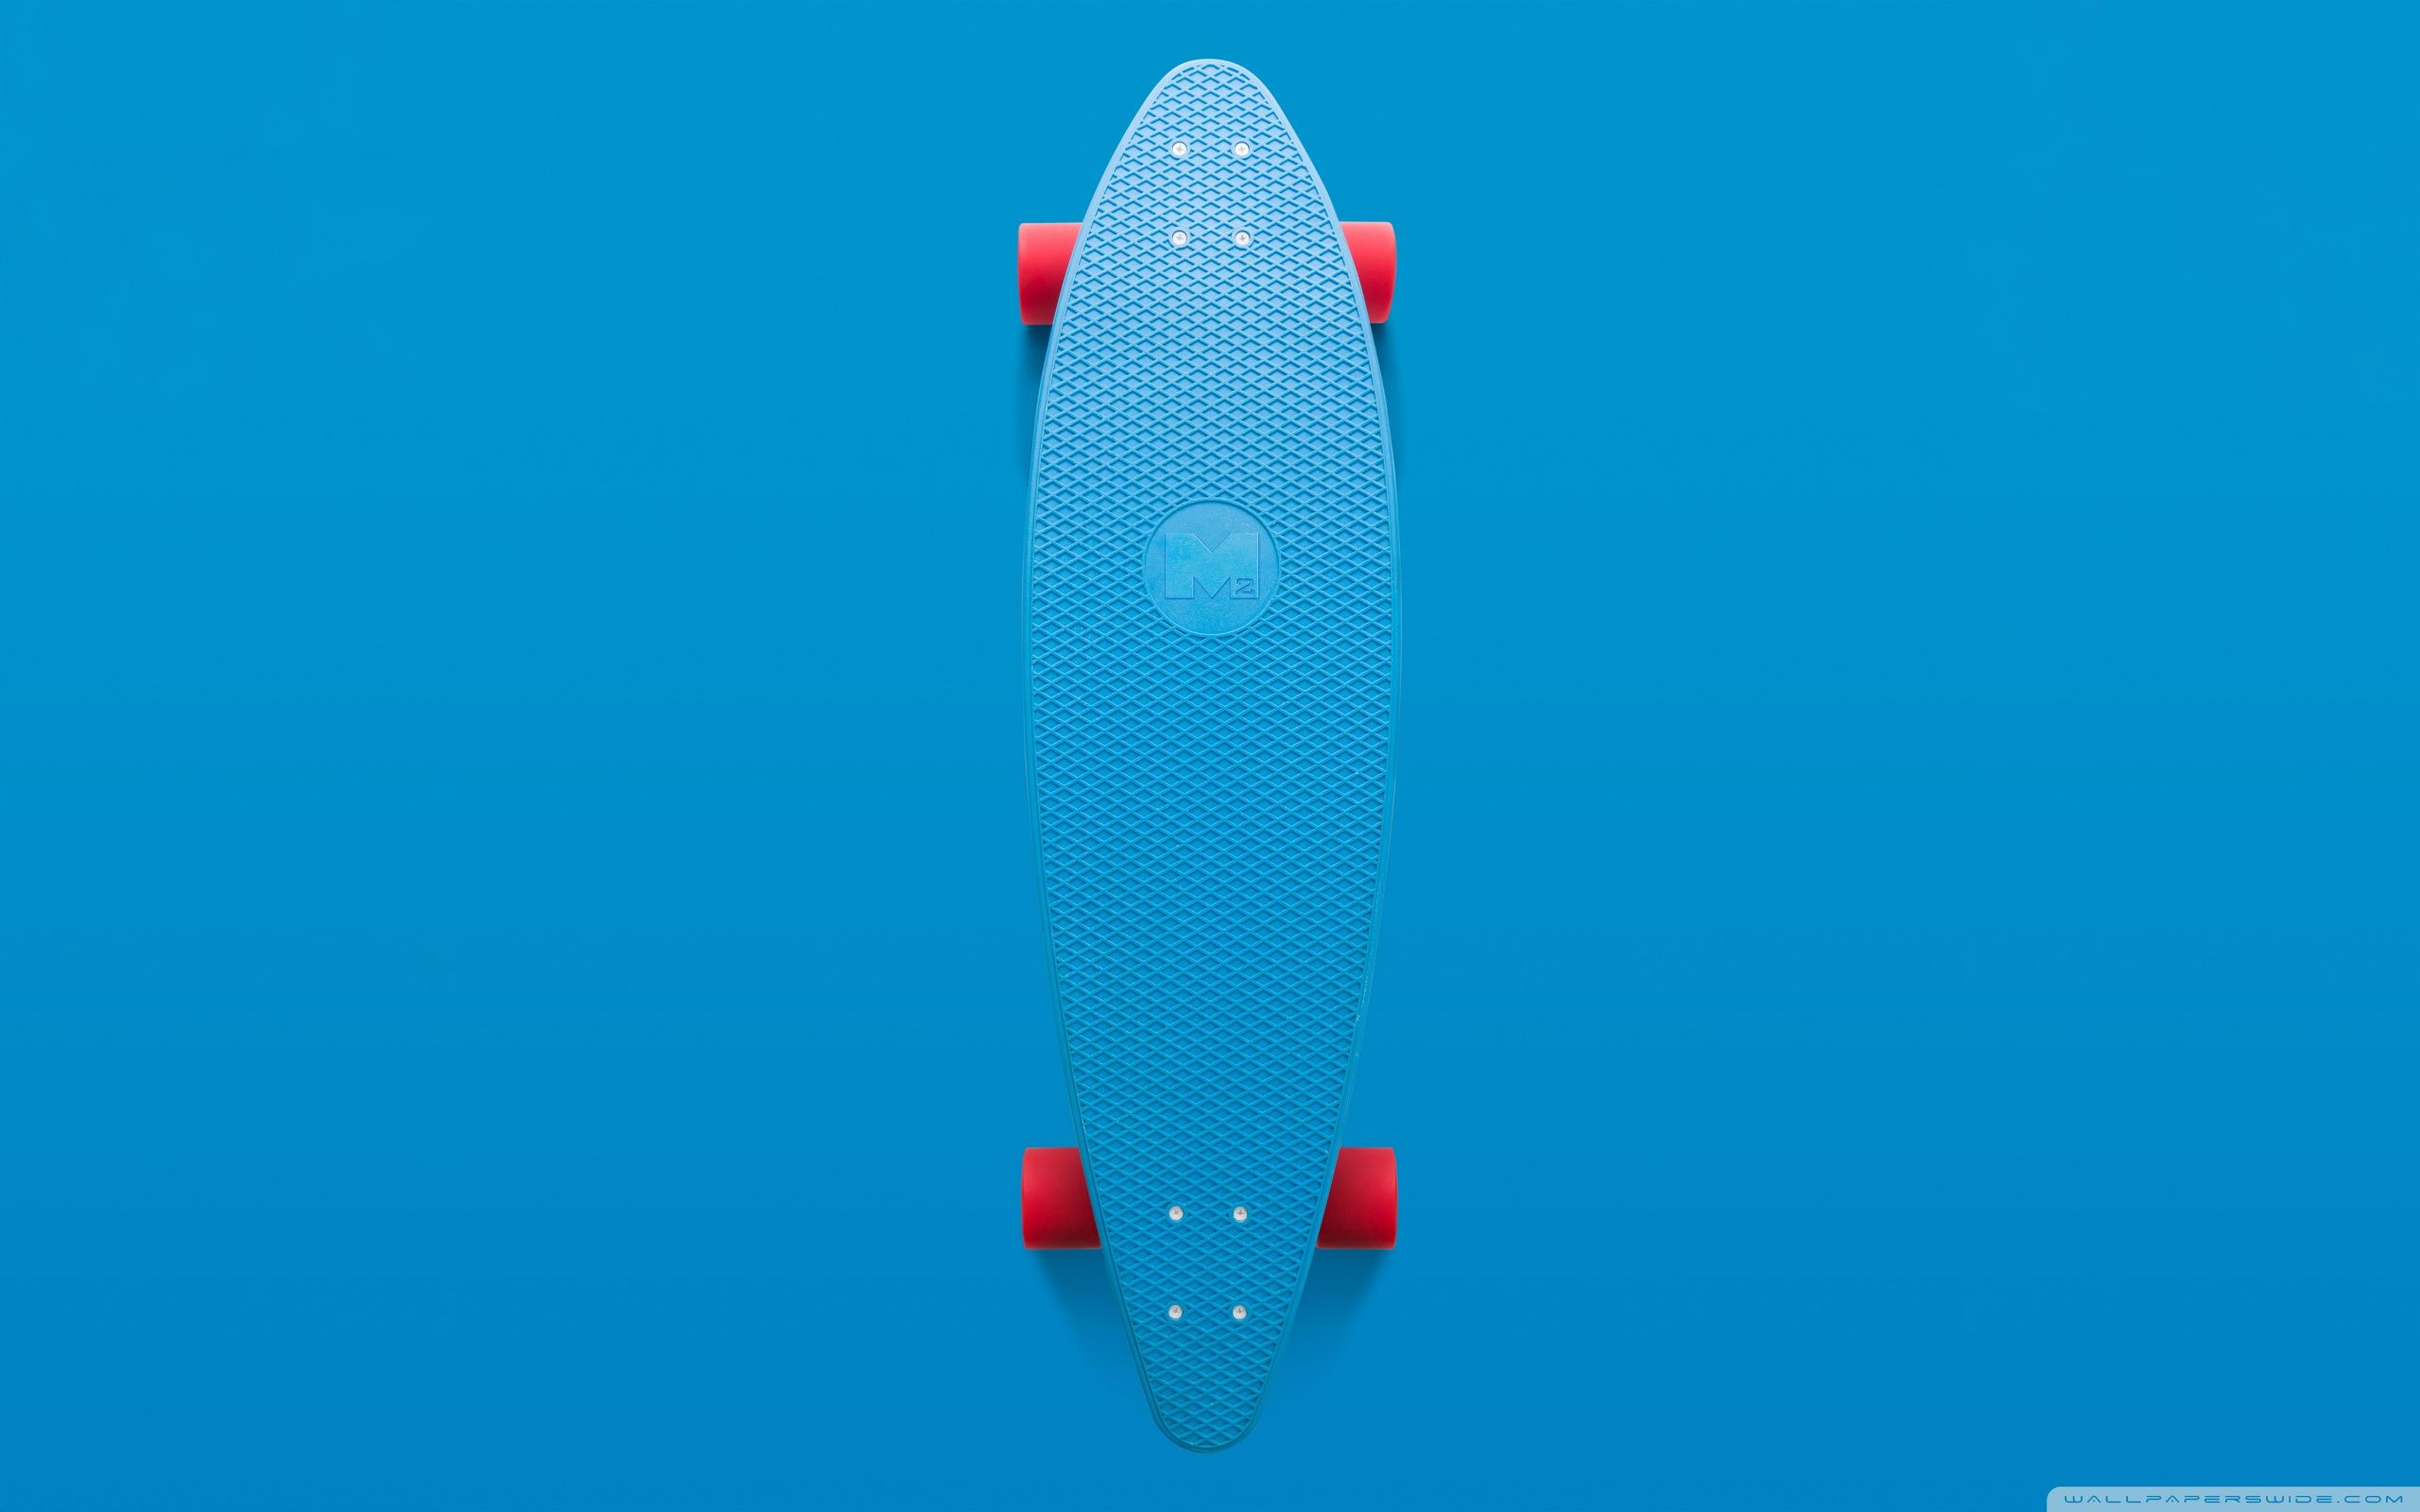 A blue skateboard on top of some red wheels - 2560x1600